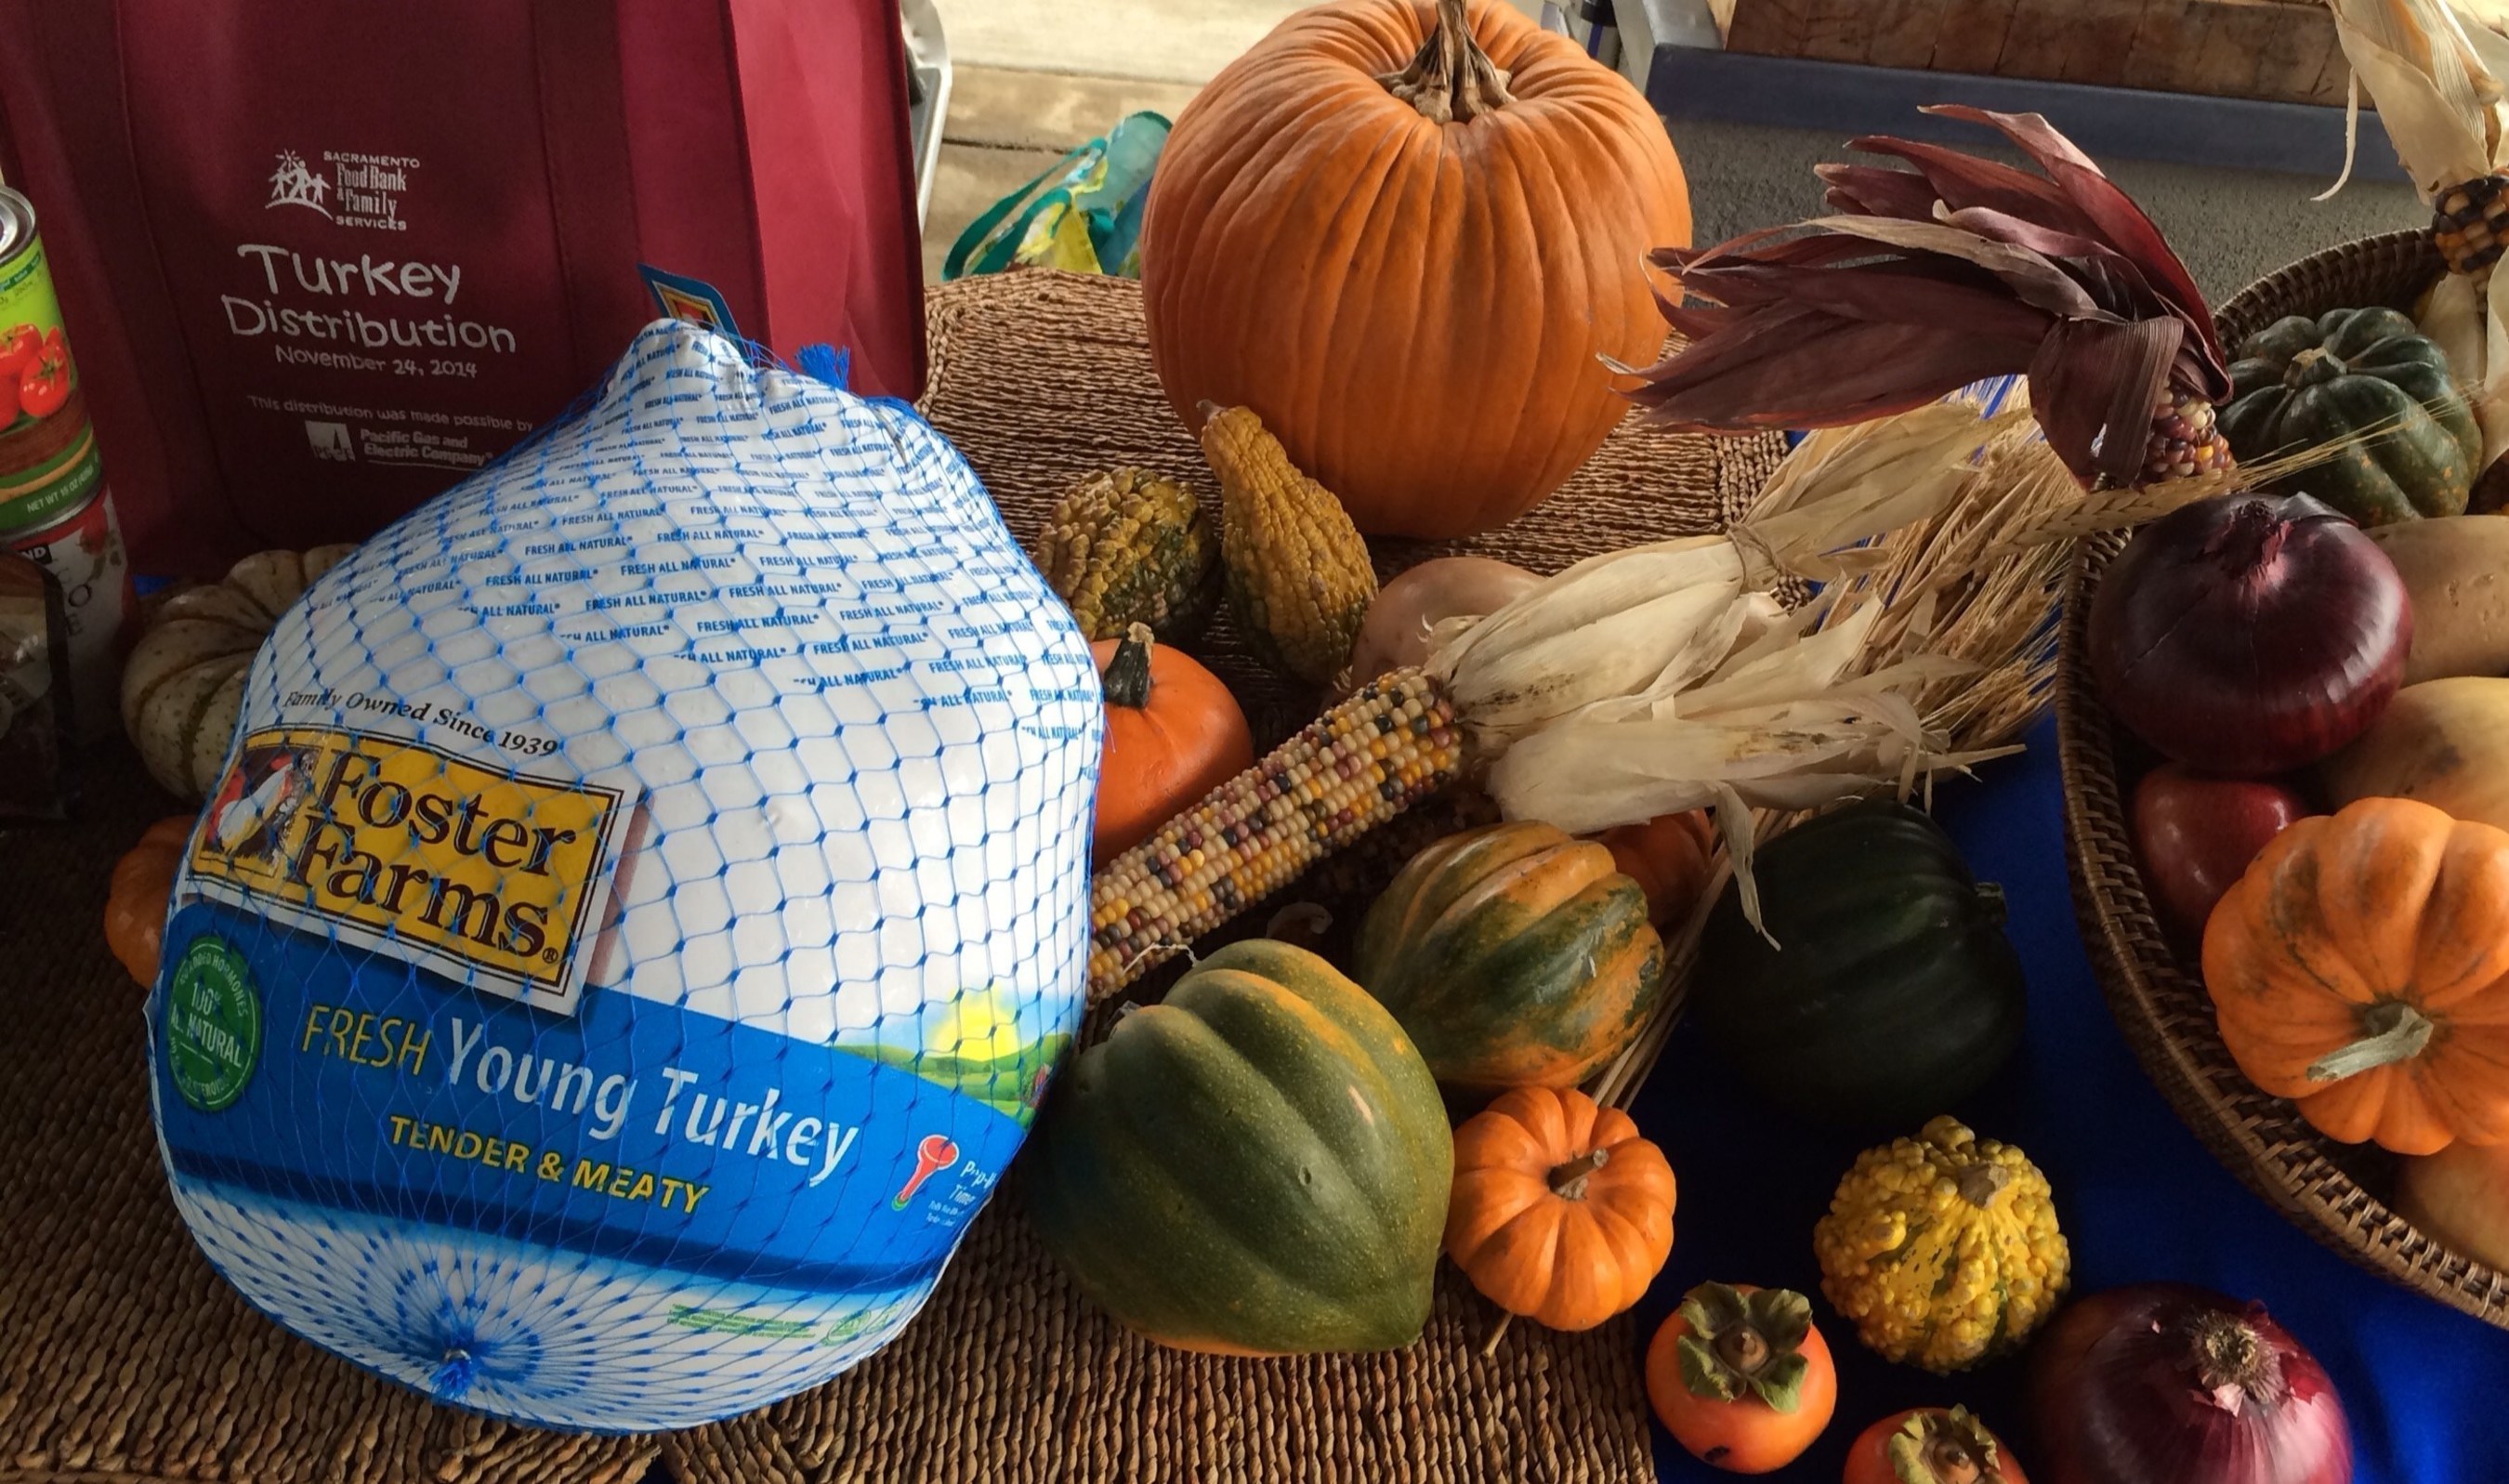 Foster Farms has donated more than 81,000 pounds of turkey to six West Coast food banks.